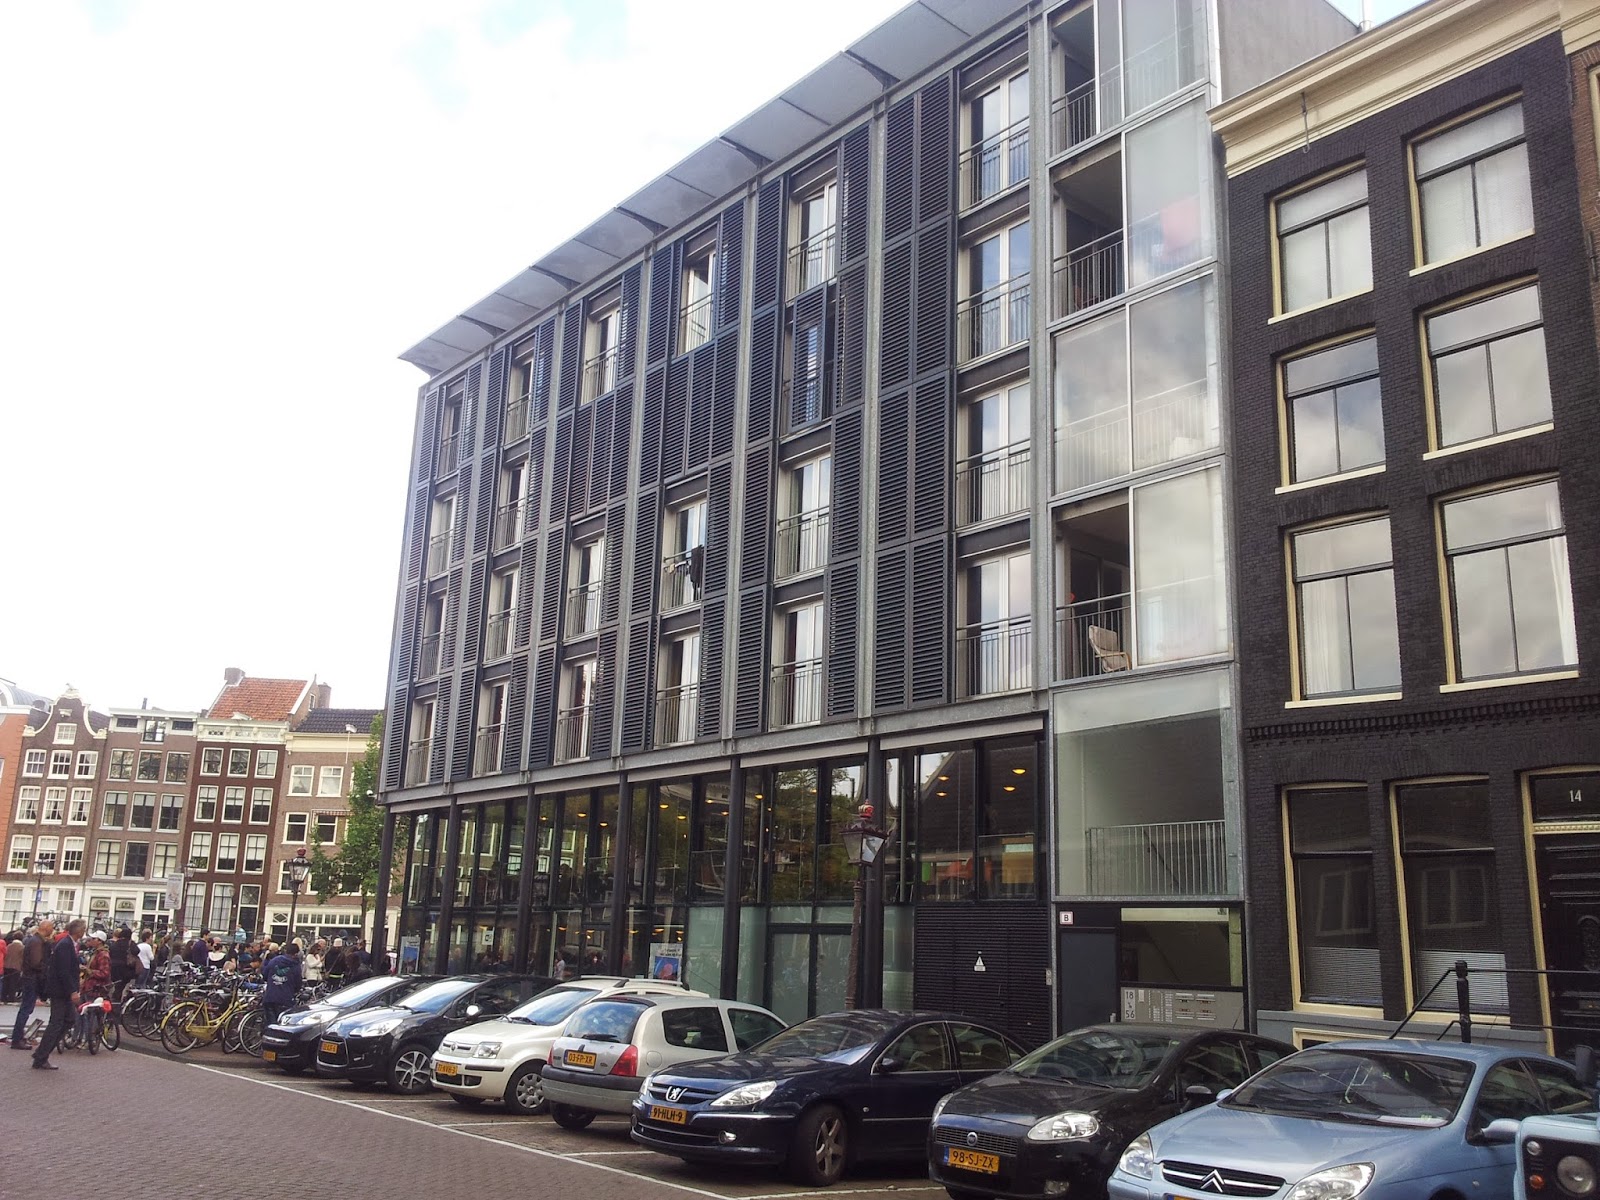 Anne Frank House Museum